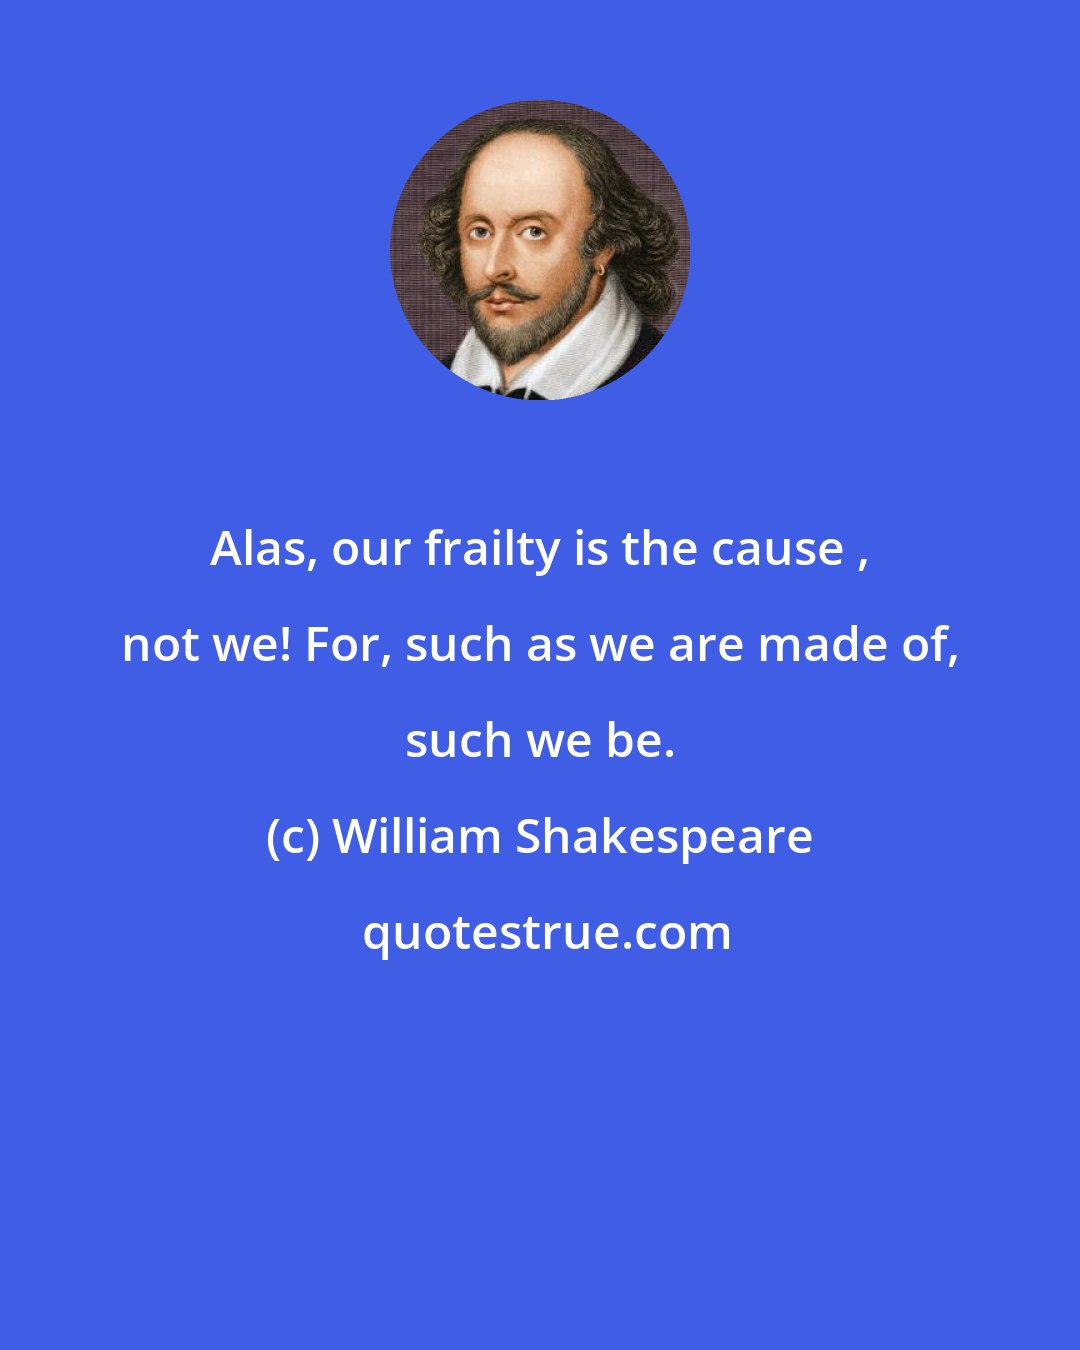 William Shakespeare: Alas, our frailty is the cause , not we! For, such as we are made of, such we be.